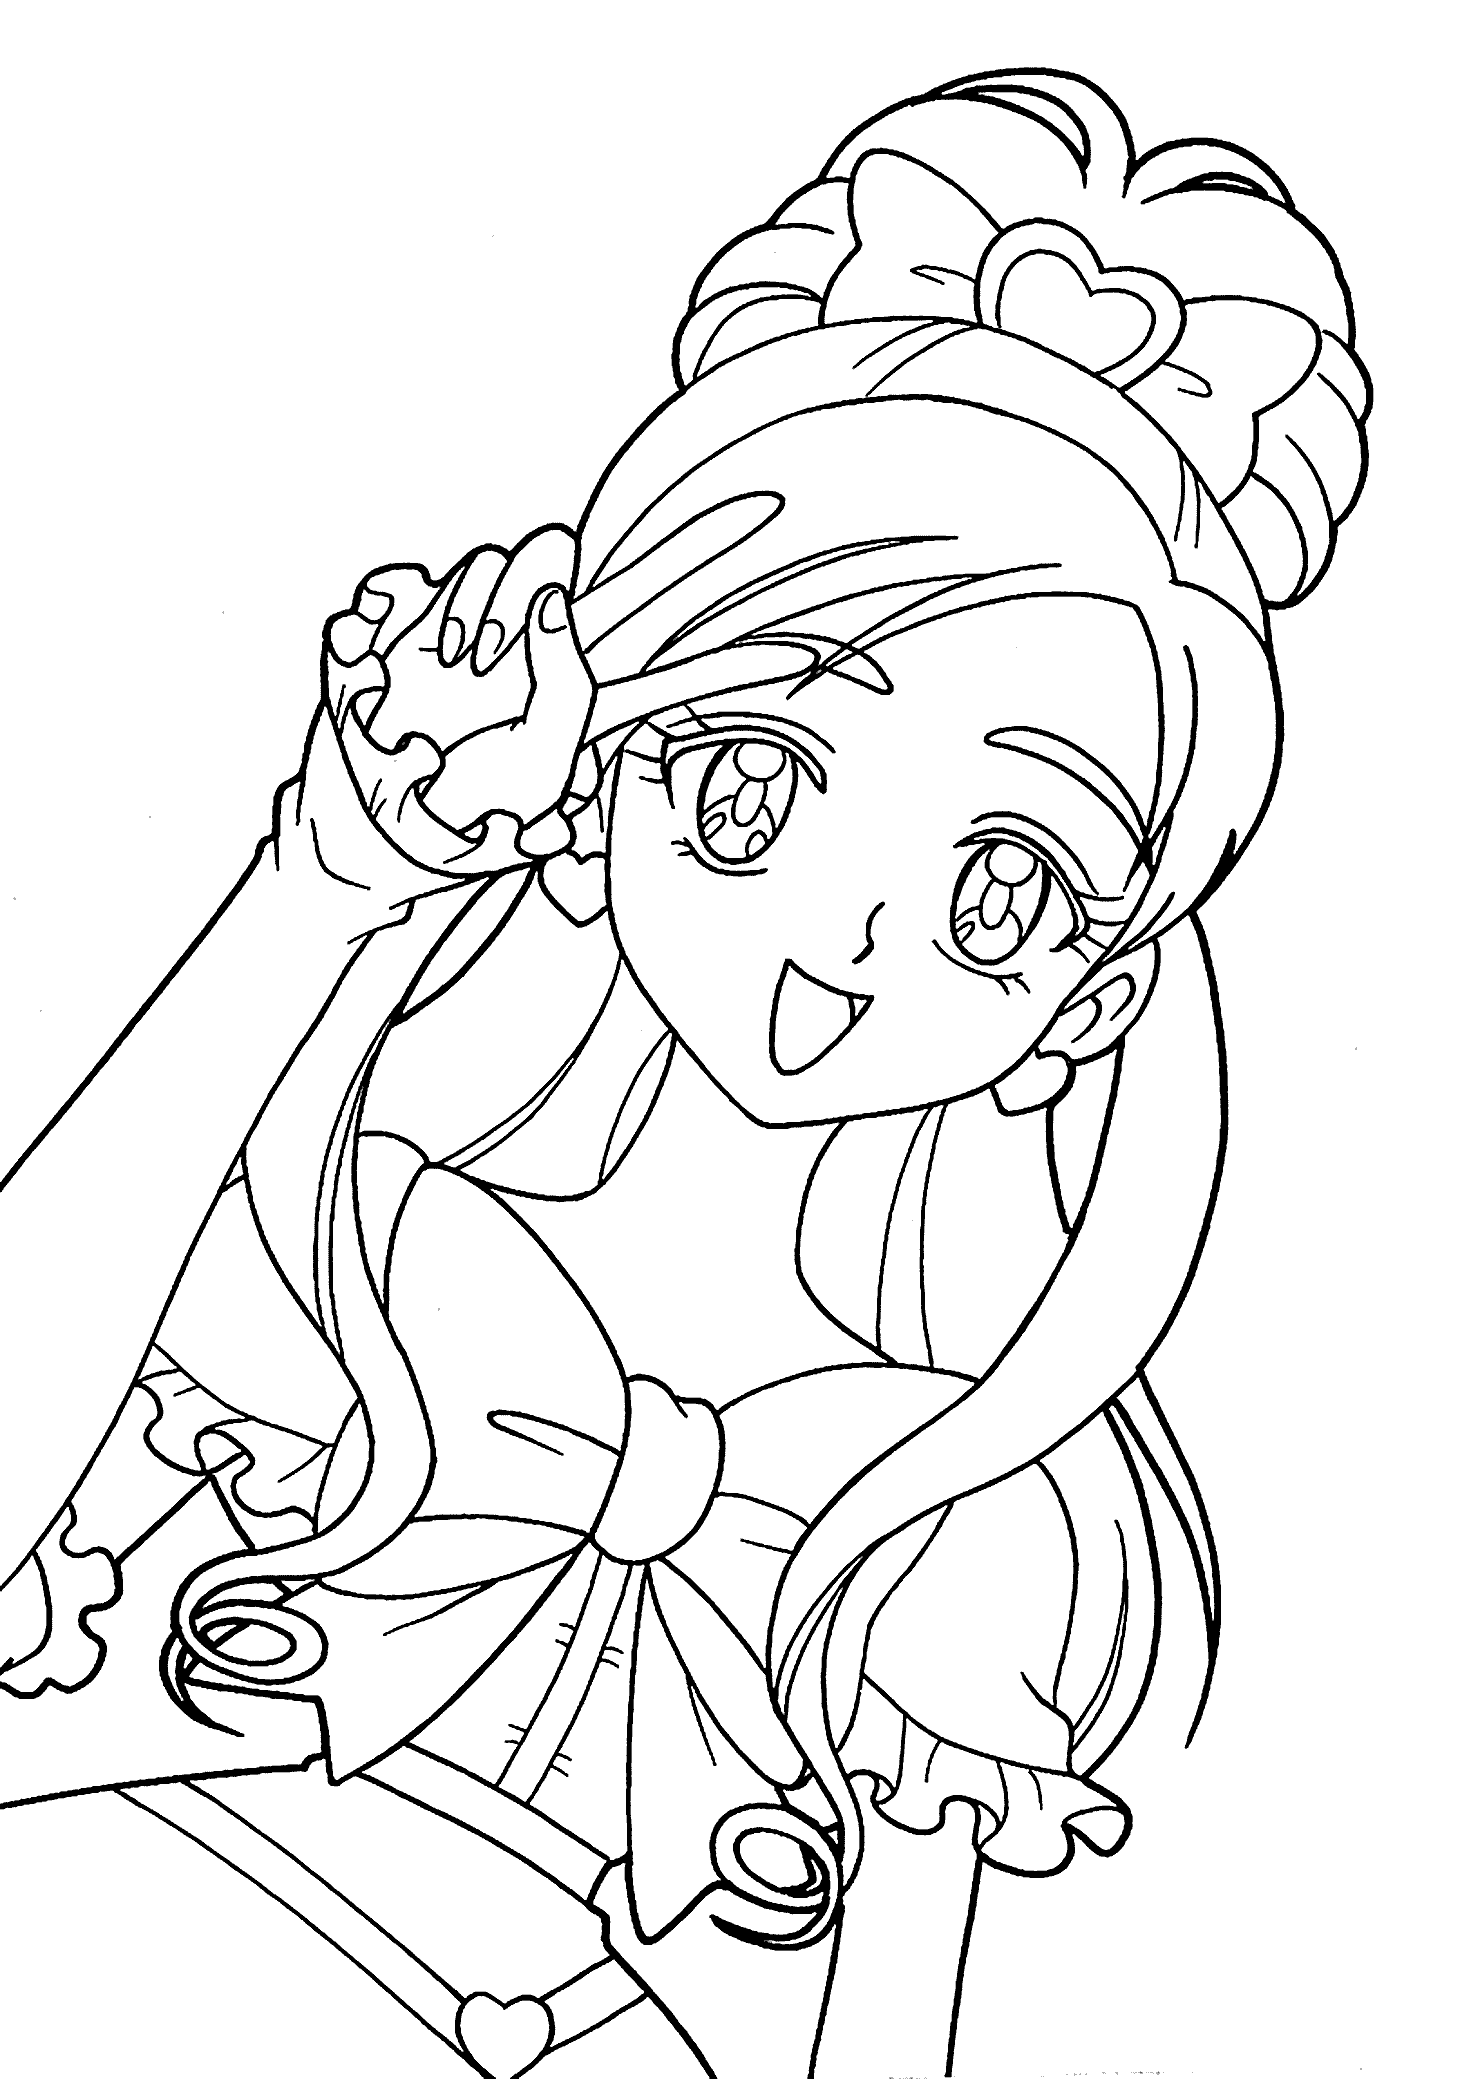 Anime Black And White Coloring Pages | Coloring Pages For All Ages